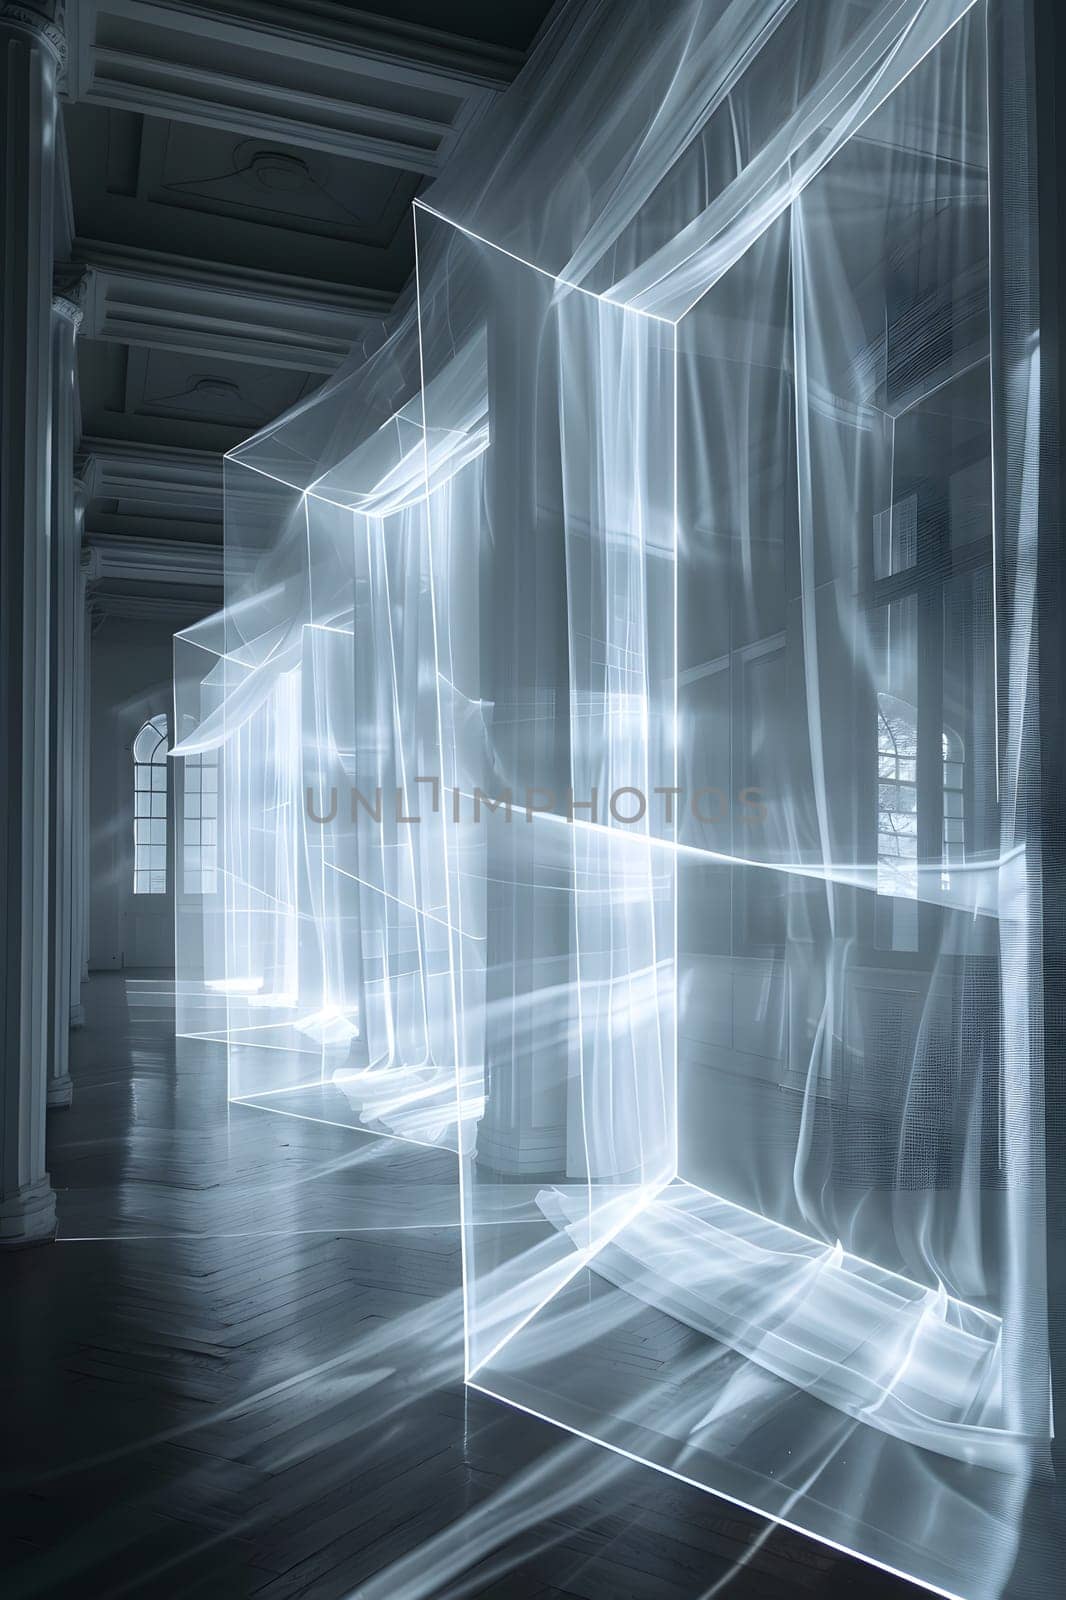 A striking monochrome photograph of a hallway with bright lights pouring out of windows, creating a symmetrical pattern of rectangles in electric blue hues